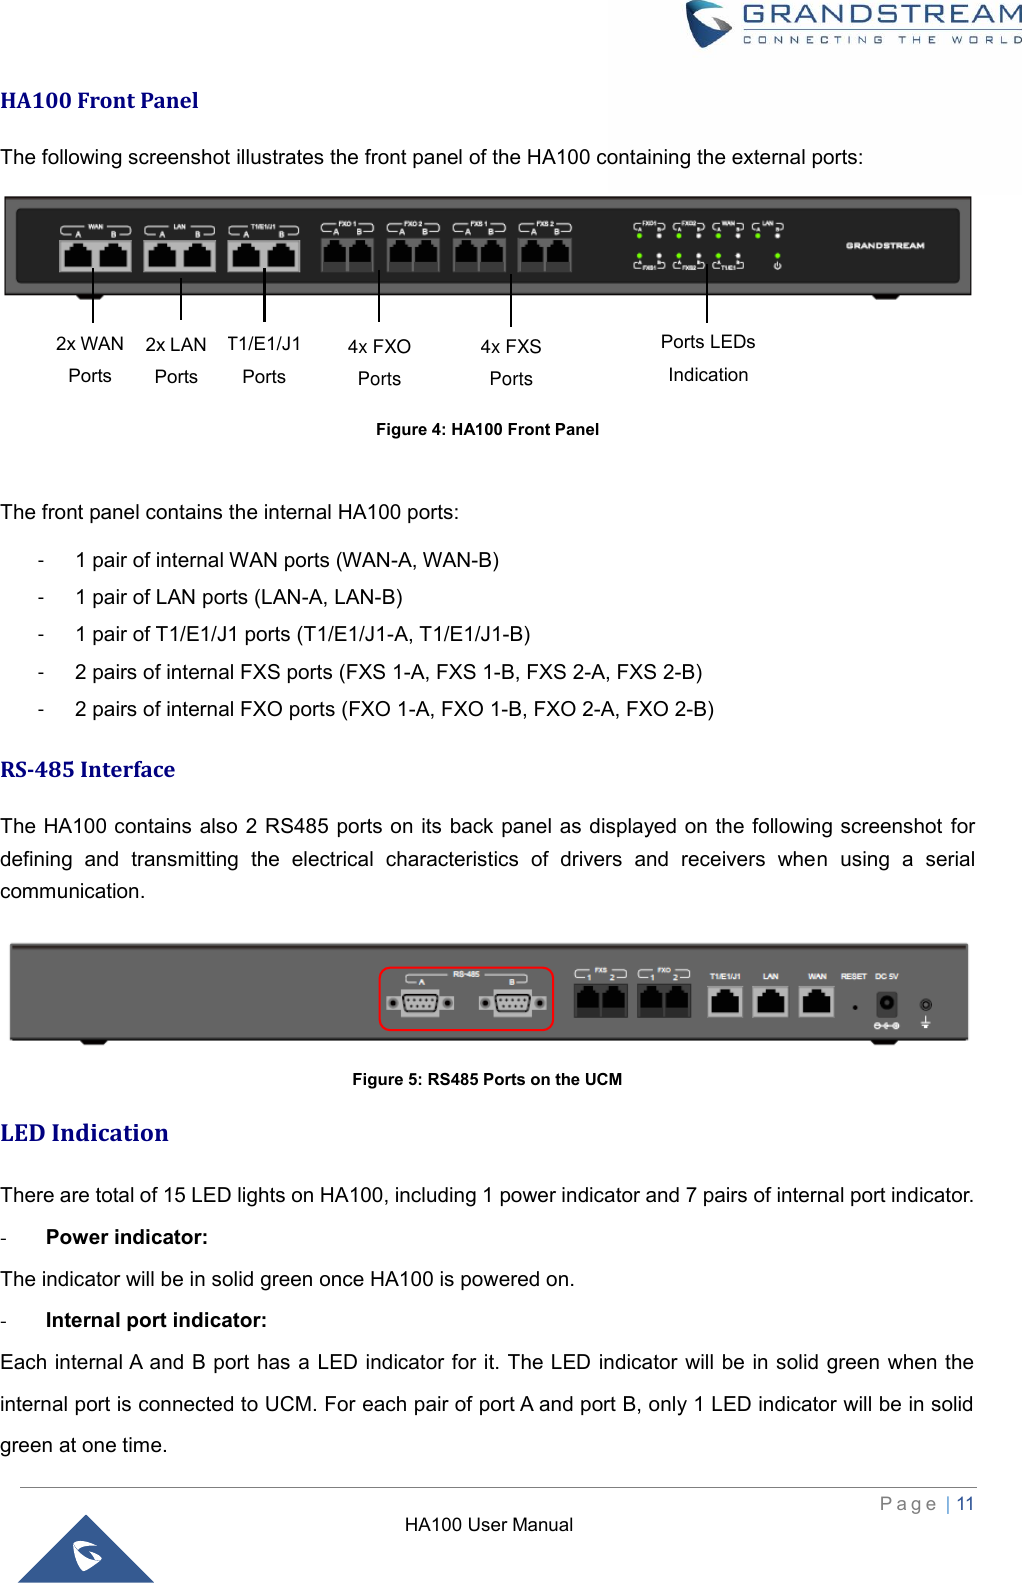 HA100 User Manual  P a g e  | 11   HA100 Front Panel The following screenshot illustrates the front panel of the HA100 containing the external ports:     Figure 4: HA100 Front Panel  The front panel contains the internal HA100 ports: -  1 pair of internal WAN ports (WAN-A, WAN-B) -  1 pair of LAN ports (LAN-A, LAN-B) -  1 pair of T1/E1/J1 ports (T1/E1/J1-A, T1/E1/J1-B) -  2 pairs of internal FXS ports (FXS 1-A, FXS 1-B, FXS 2-A, FXS 2-B) -  2 pairs of internal FXO ports (FXO 1-A, FXO 1-B, FXO 2-A, FXO 2-B) RS-485 Interface The HA100 contains also 2 RS485 ports on its back panel as displayed on the following screenshot for defining  and  transmitting  the  electrical  characteristics  of  drivers  and  receivers  when  using  a  serial communication.  Figure 5: RS485 Ports on the UCM LED Indication There are total of 15 LED lights on HA100, including 1 power indicator and 7 pairs of internal port indicator. - Power indicator: The indicator will be in solid green once HA100 is powered on. - Internal port indicator: Each internal A and B port has a LED indicator for it. The LED indicator will be in solid green when the internal port is connected to UCM. For each pair of port A and port B, only 1 LED indicator will be in solid green at one time. Ports LEDs Indication T1/E1/J1 Ports 4x FXS Ports 2x WAN Ports 4x FXO Ports 2x LAN Ports 